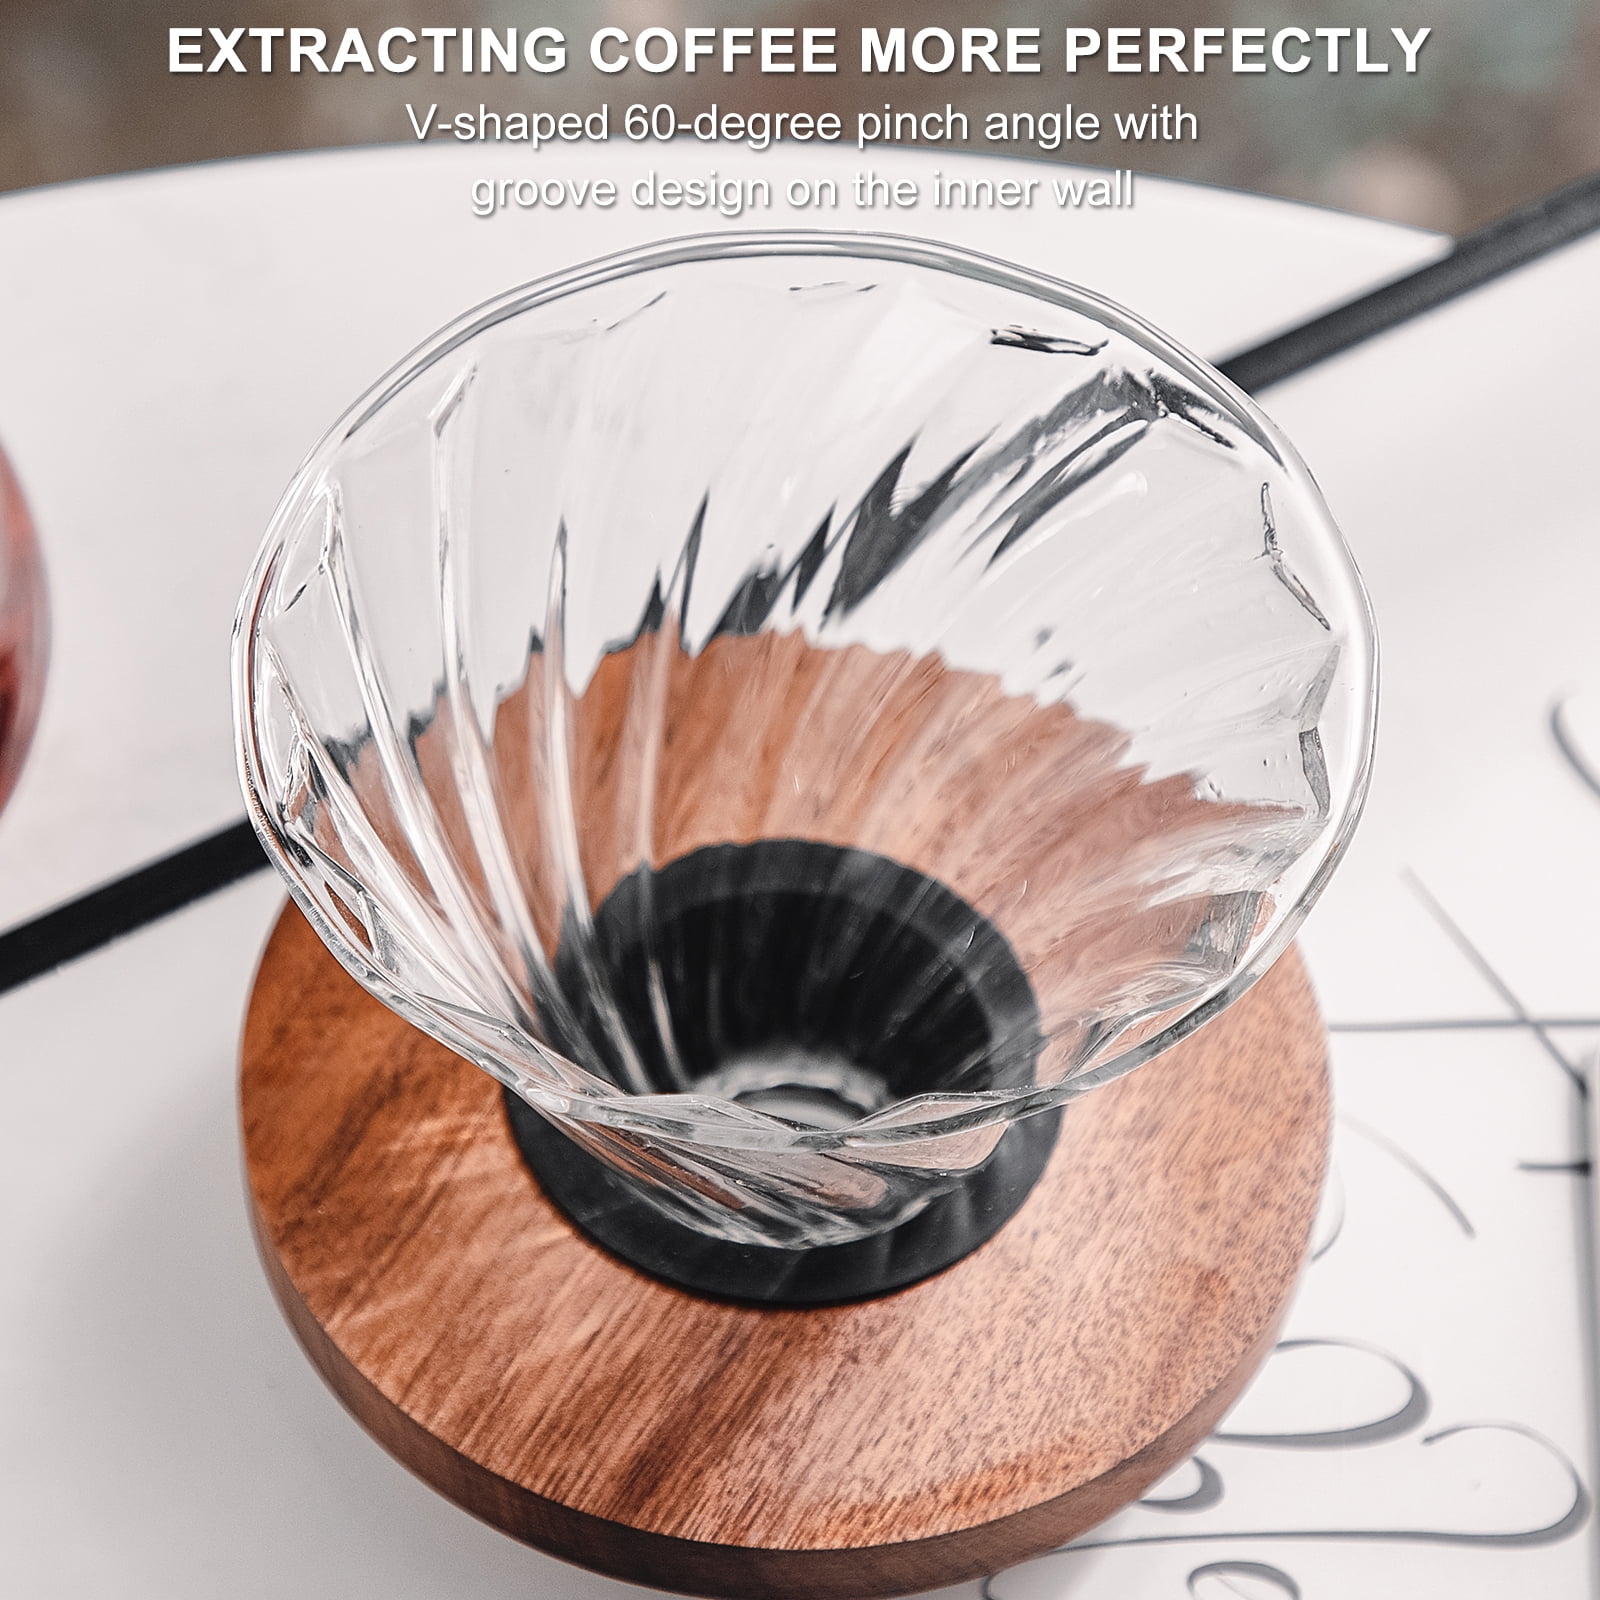 Bincoo Glass Coffee Clever Dripper Set Pour Over Coffee Filters